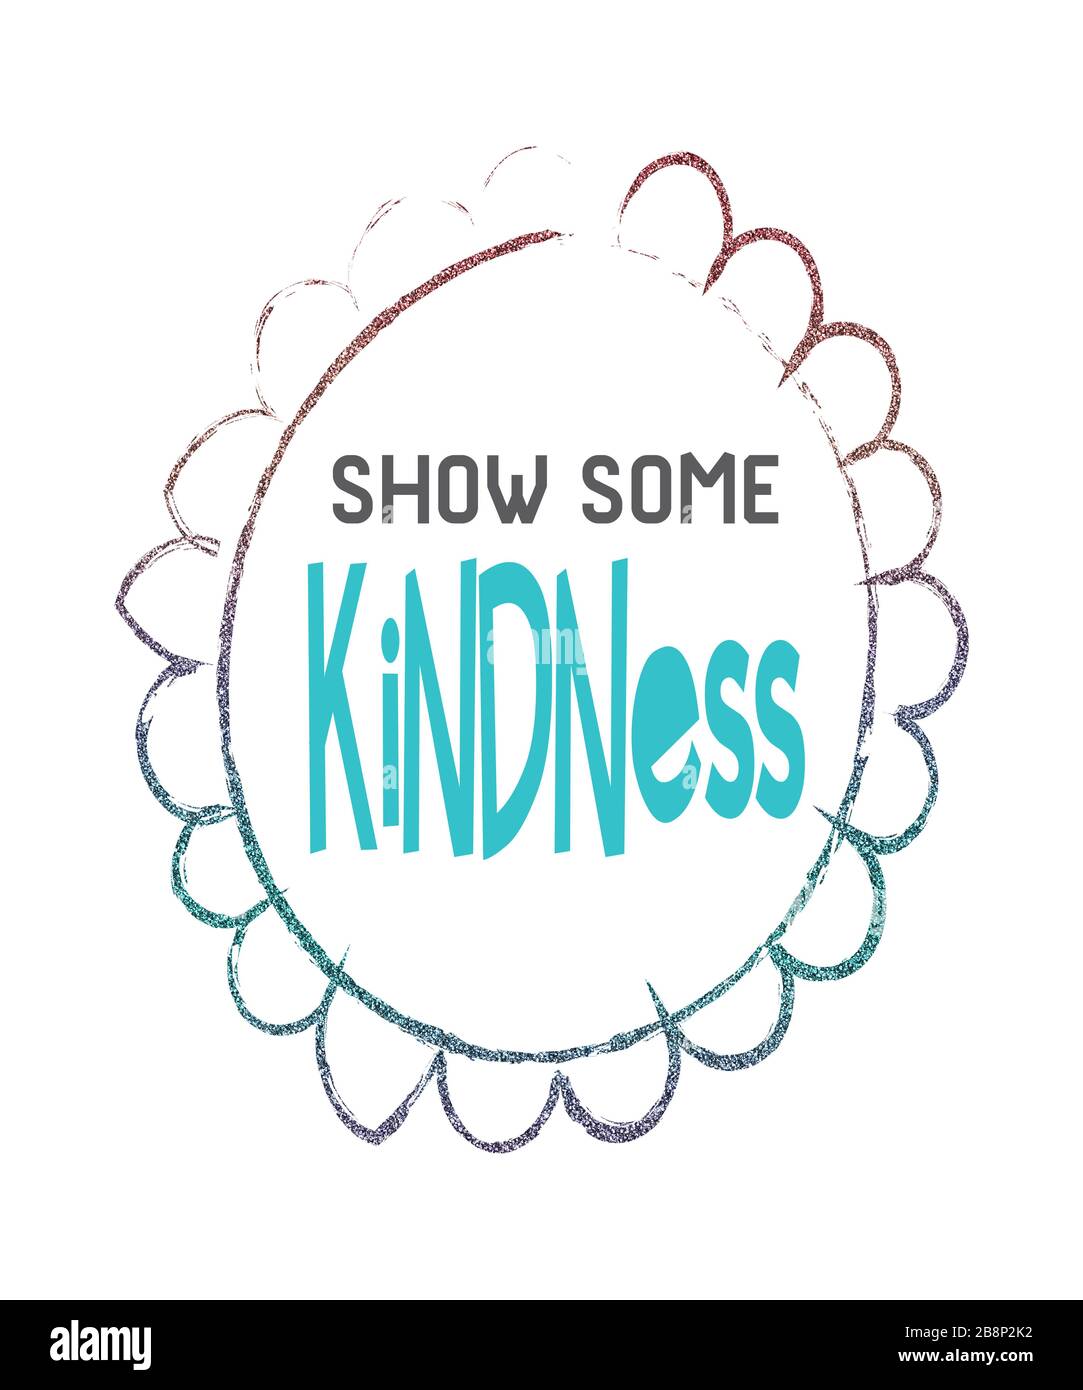 Show some kindness graphic in a flower shape whimsical illustration with glitter effect typography on a white background. Stock Photo